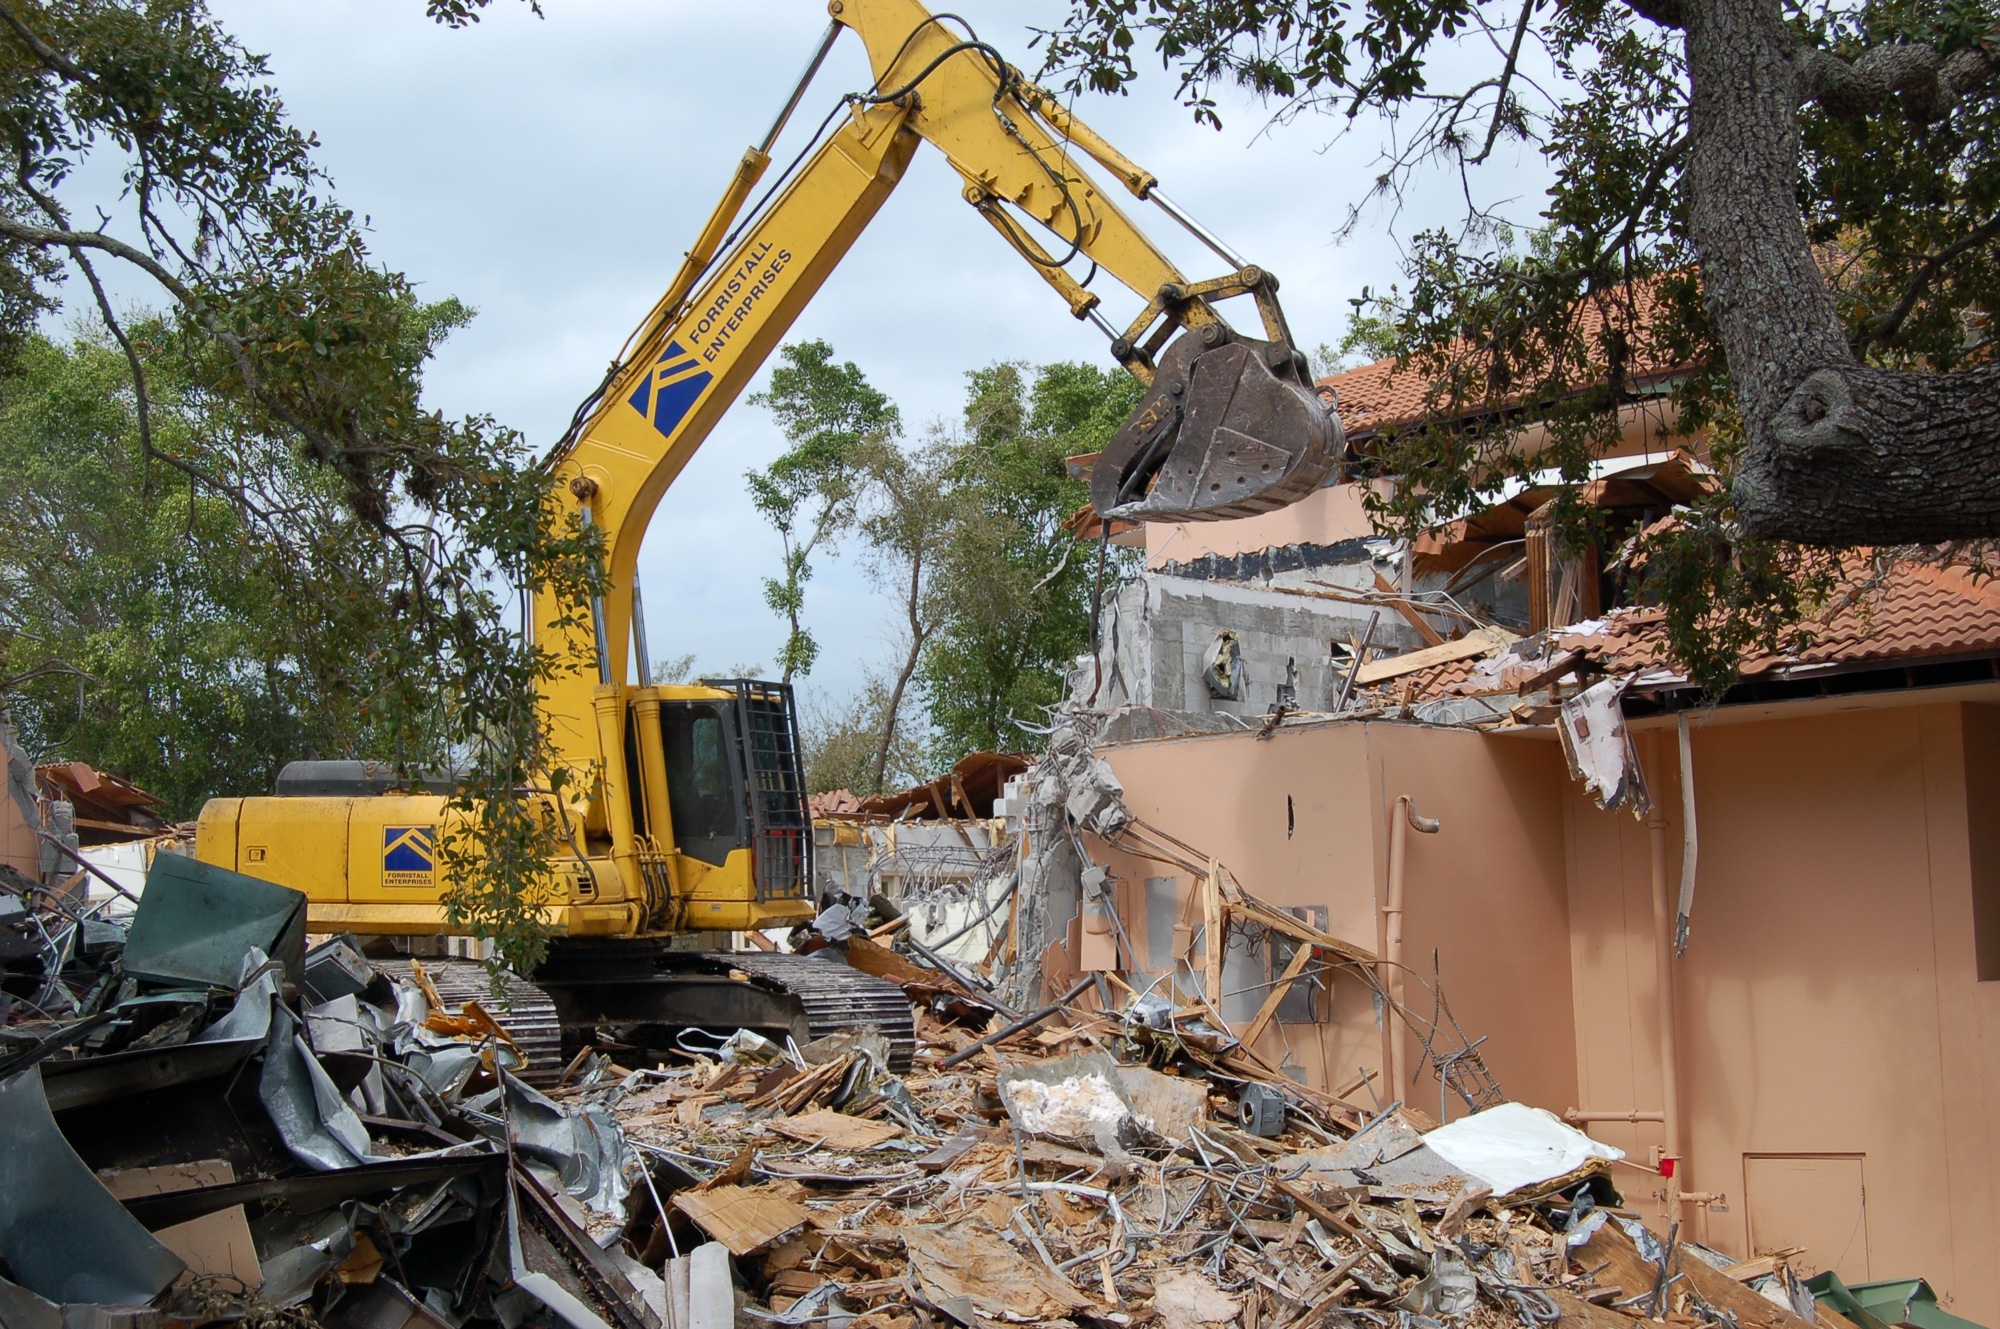 In February 2019, demolition began on the former Amore restaurant building. File photo